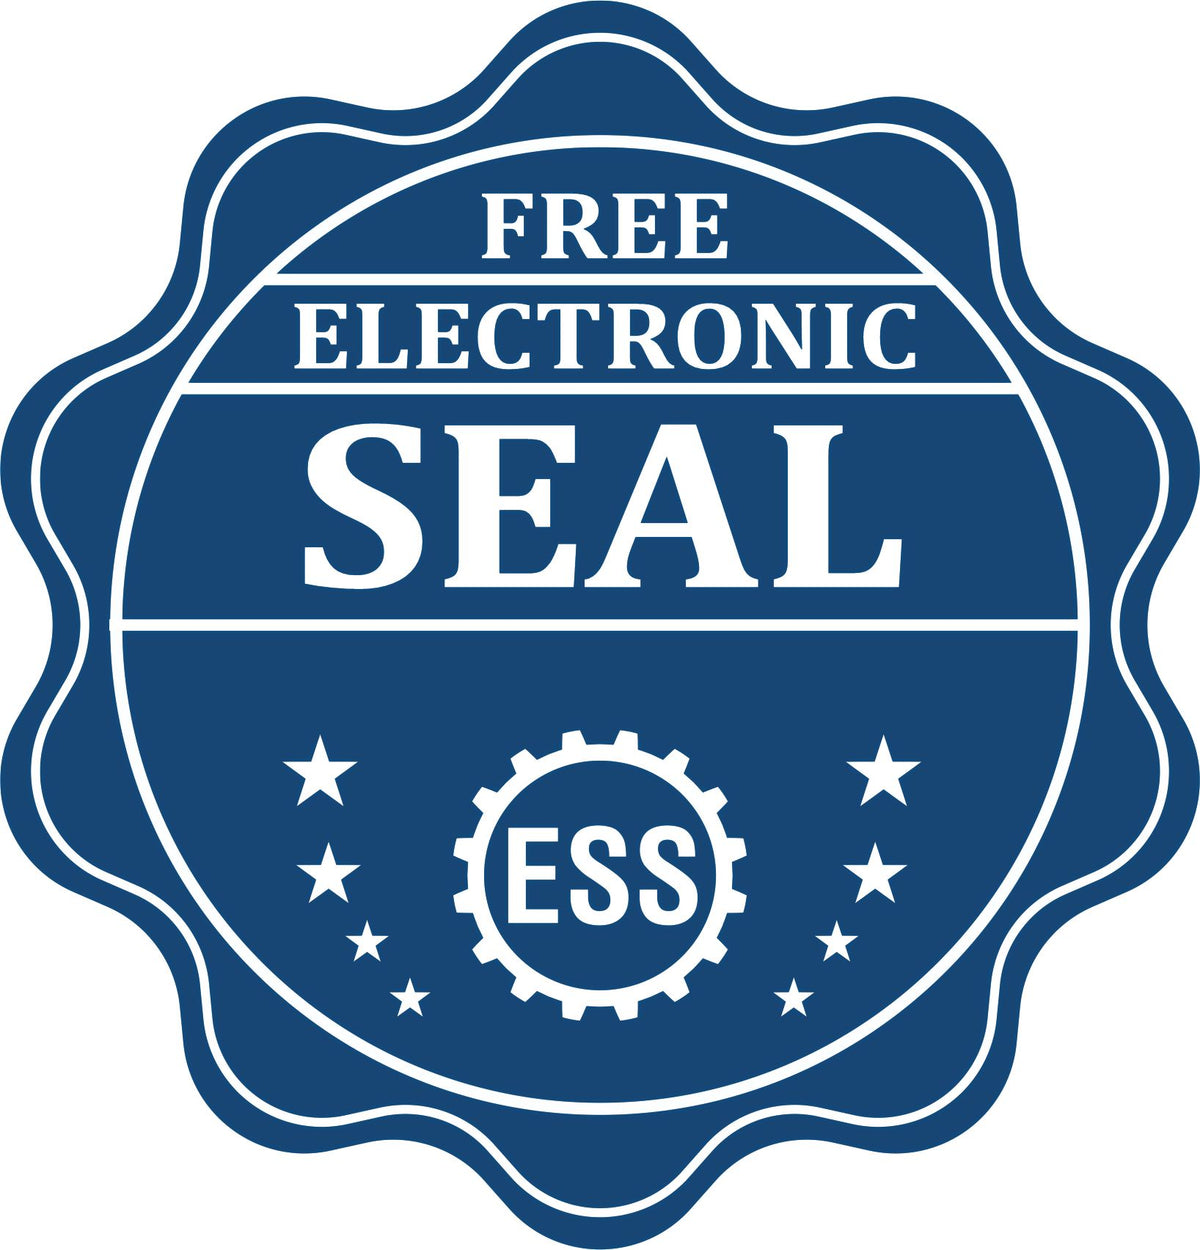 A badge showing a free electronic seal for the Super Slim Florida Notary Public Stamp with stars and the ESS gear on the emblem.